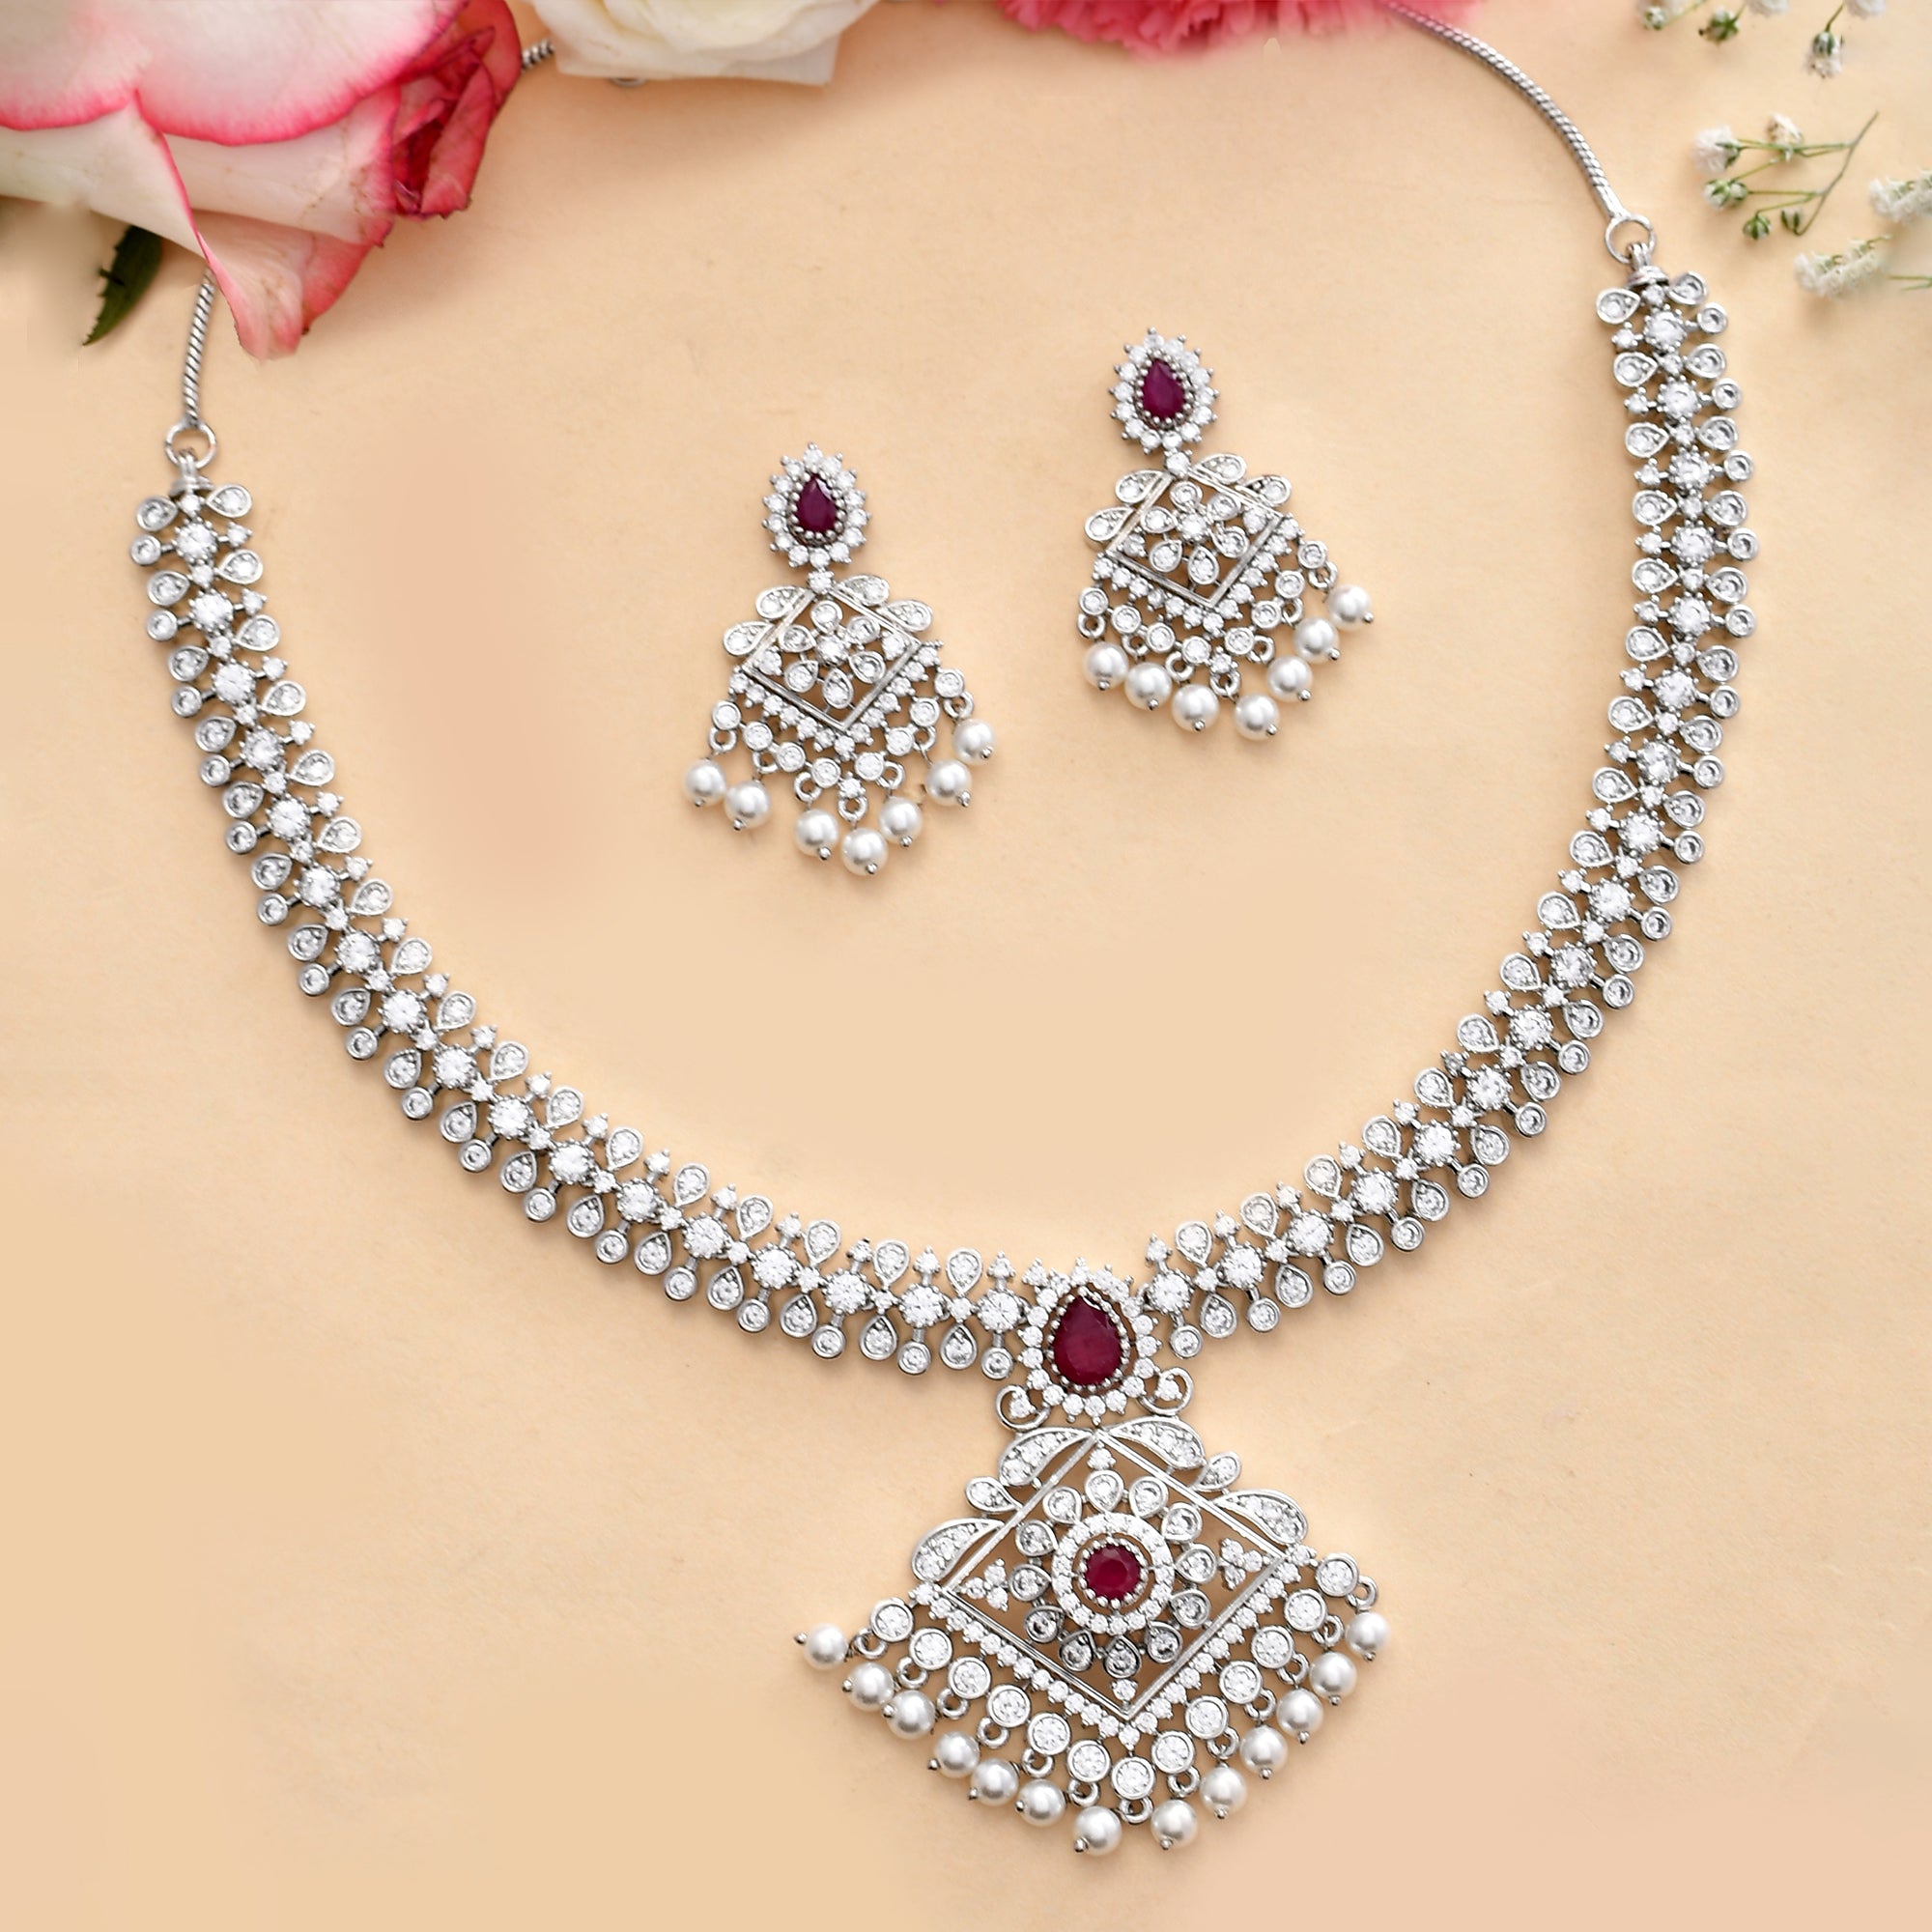 Oxidized Beautifully Crafted Cubic Zirconia Necklace Set